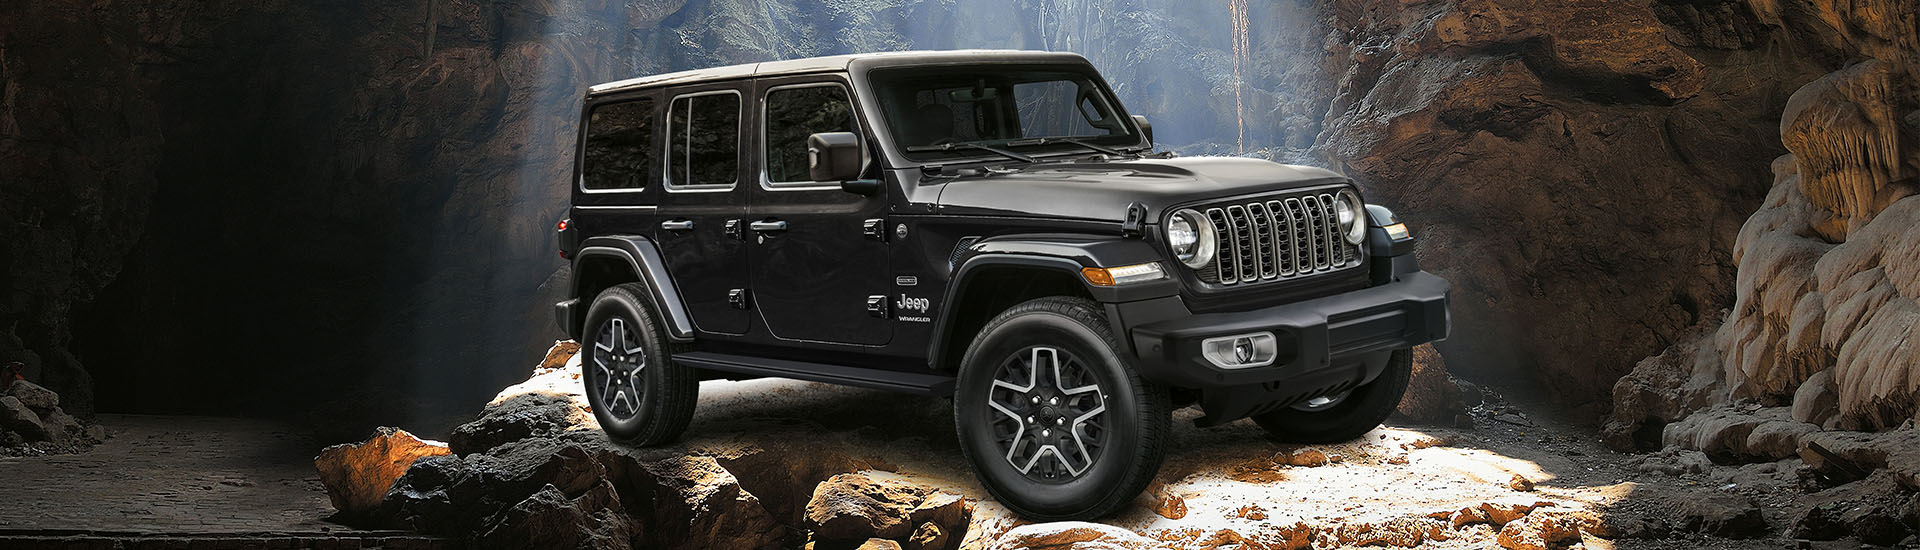 Jeep unveils 2024 Wrangler SUV amid sales battle with Ford Bronco